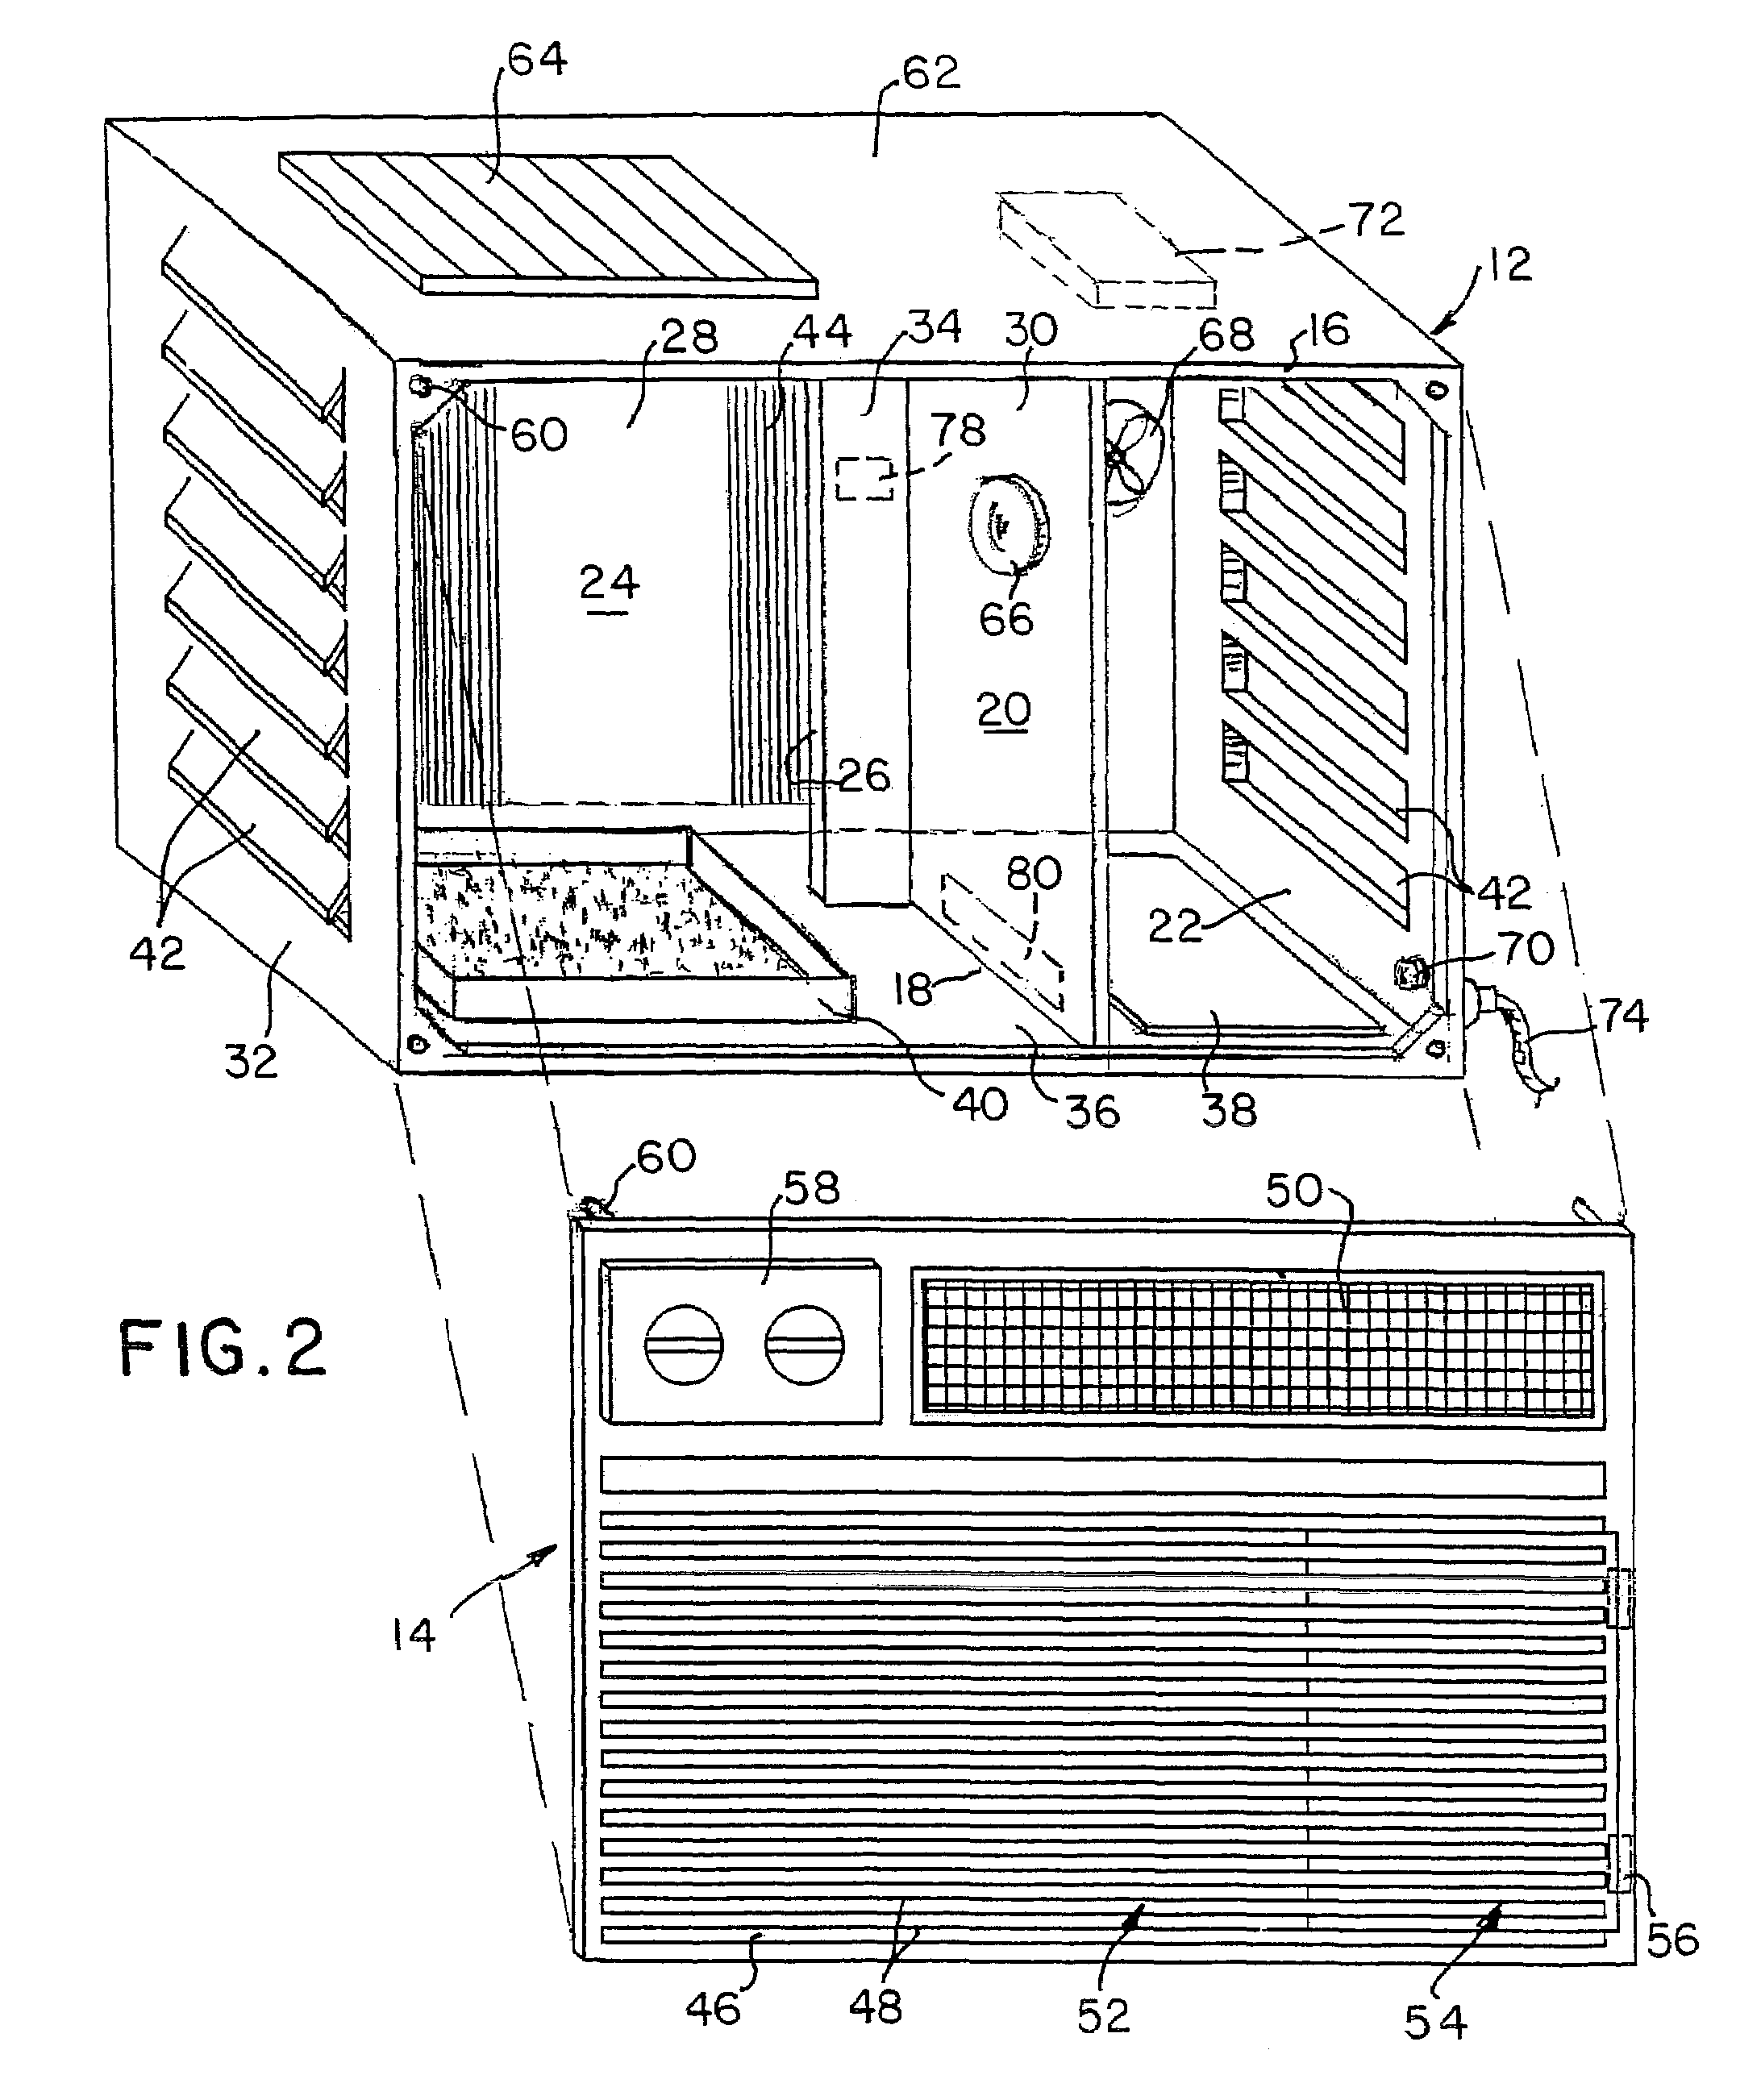 Animal housing structure and apparatus